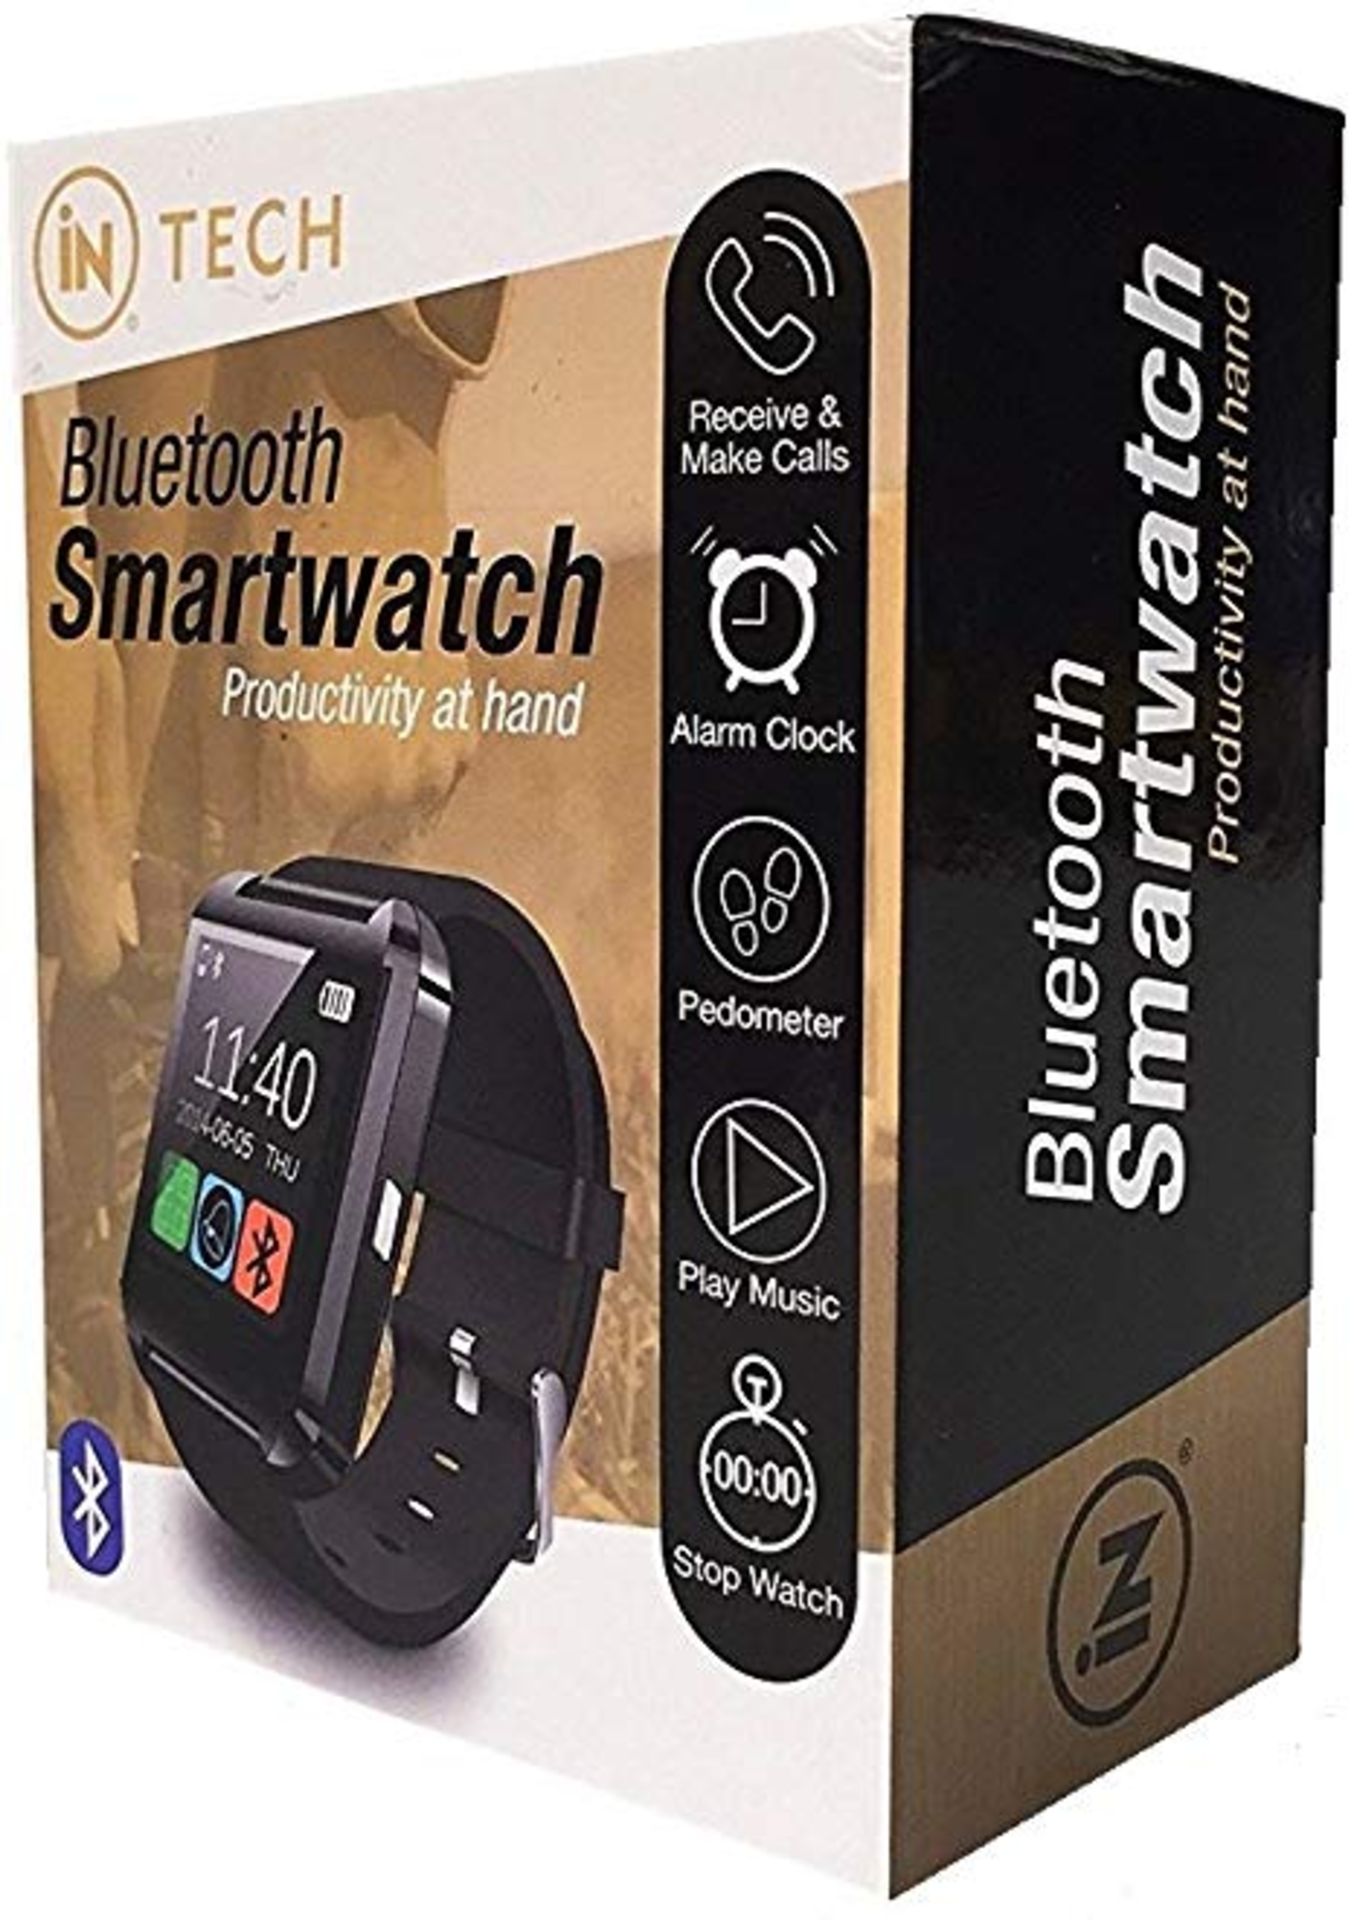 V Brand New In Tech Bluetooth Smart Watch - Receive and Make Calls - Alarm Clock - Pedometer -